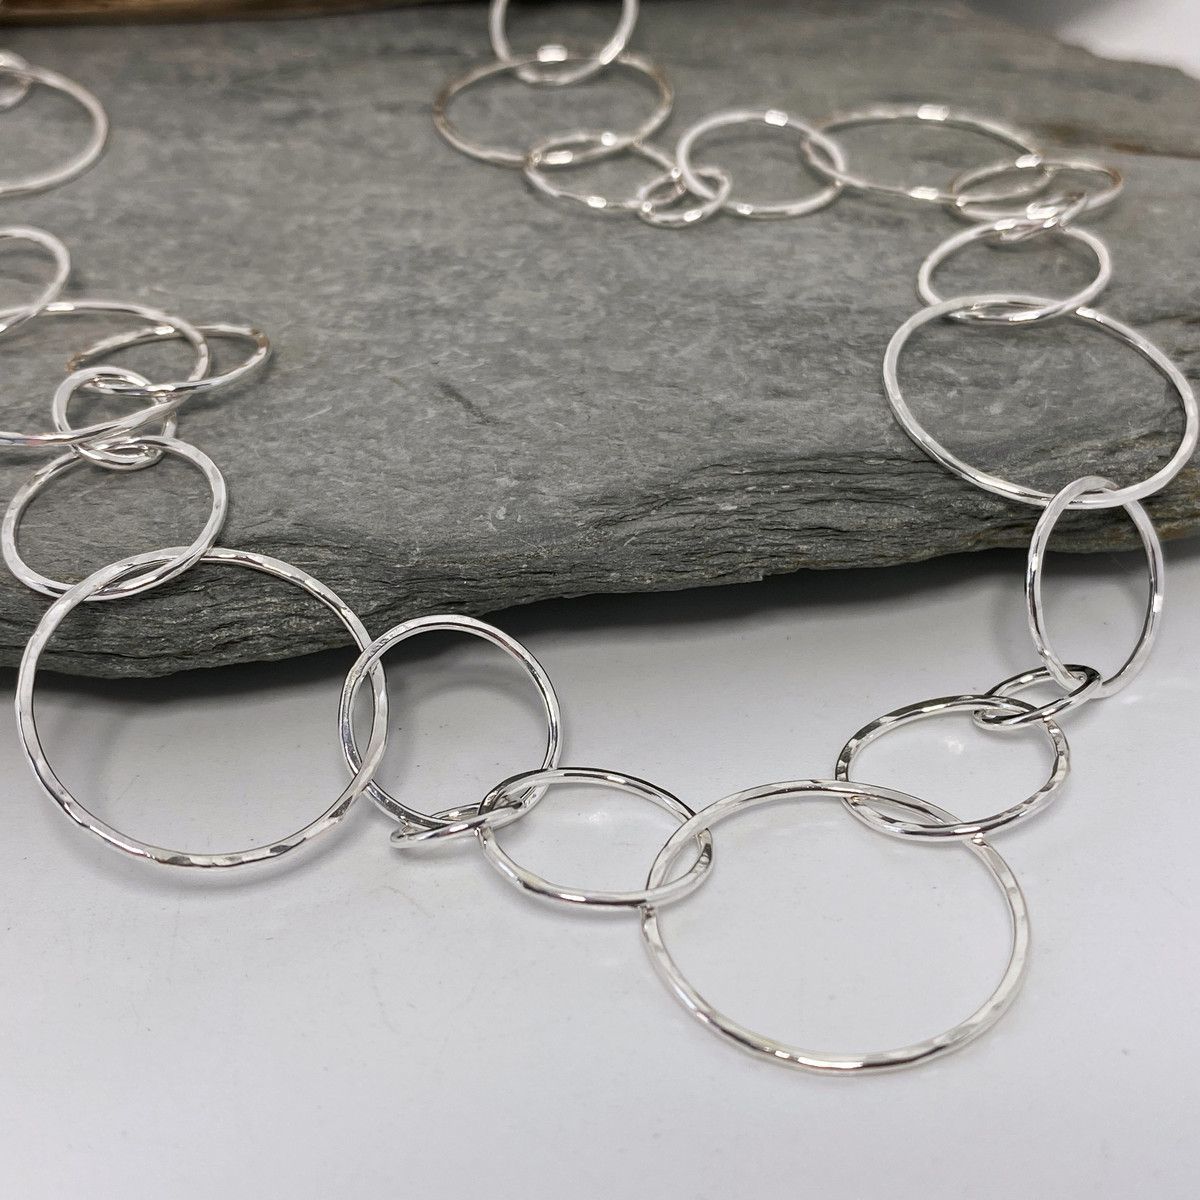 Handmade silver chain necklace